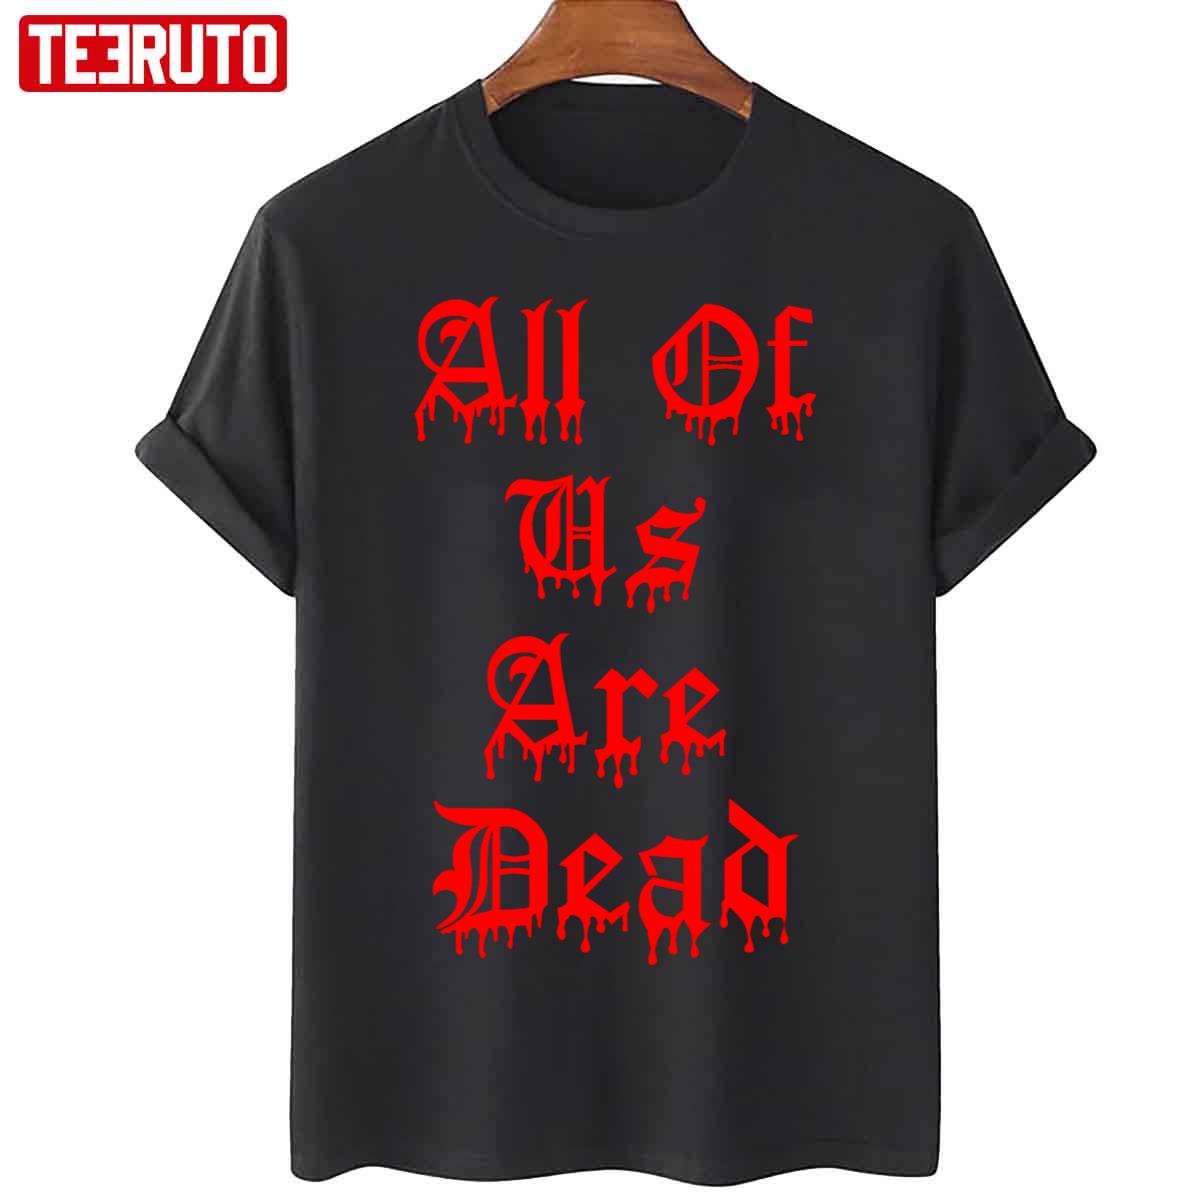 All Of Us Are Dead Unisex T-Shirt